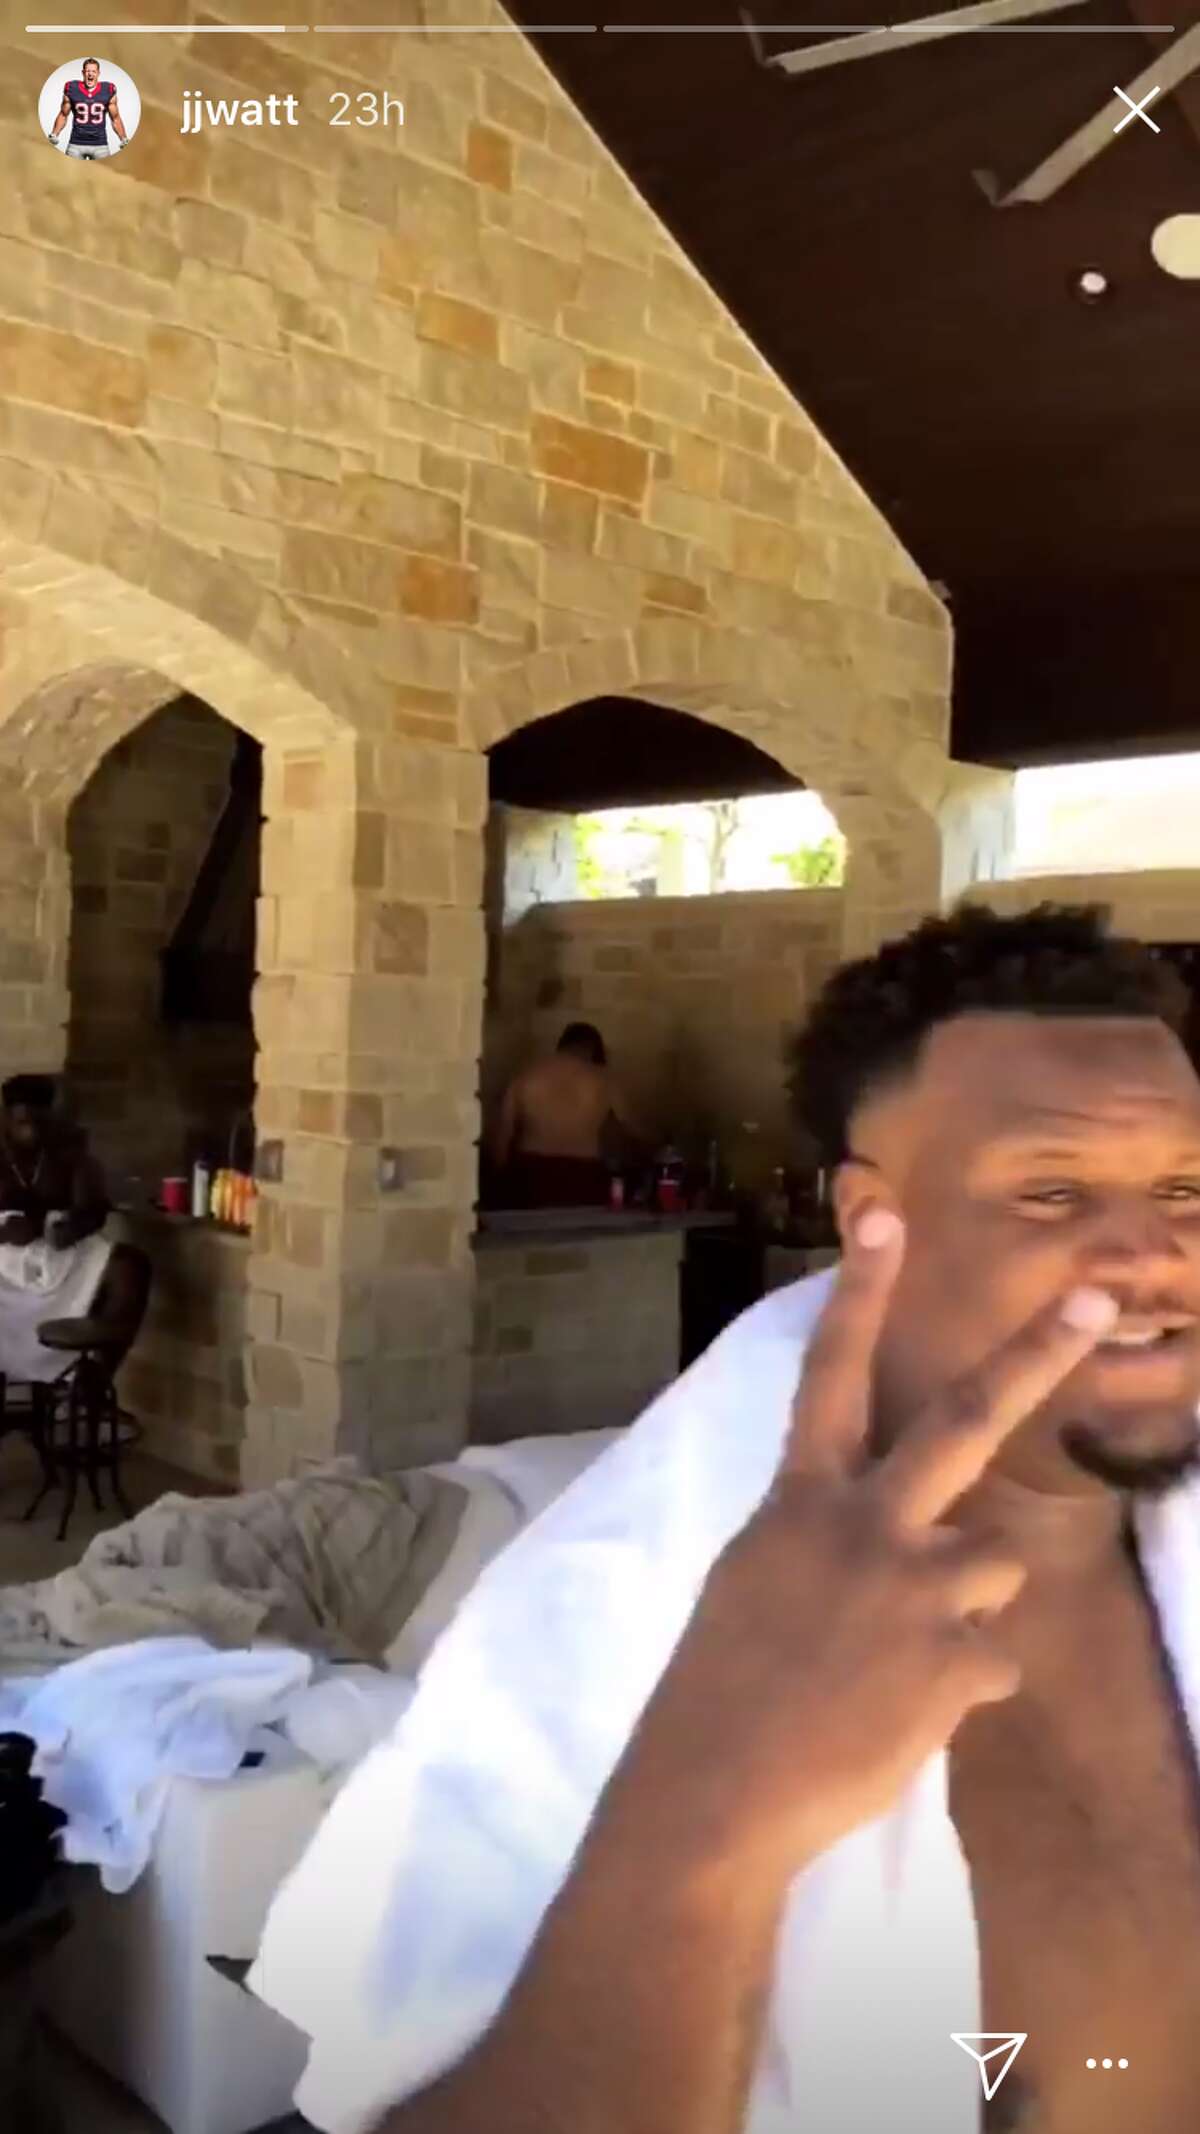 J.J Watt threw an epic pool party for his teammates and posted clips of the fun to his Insta Story.